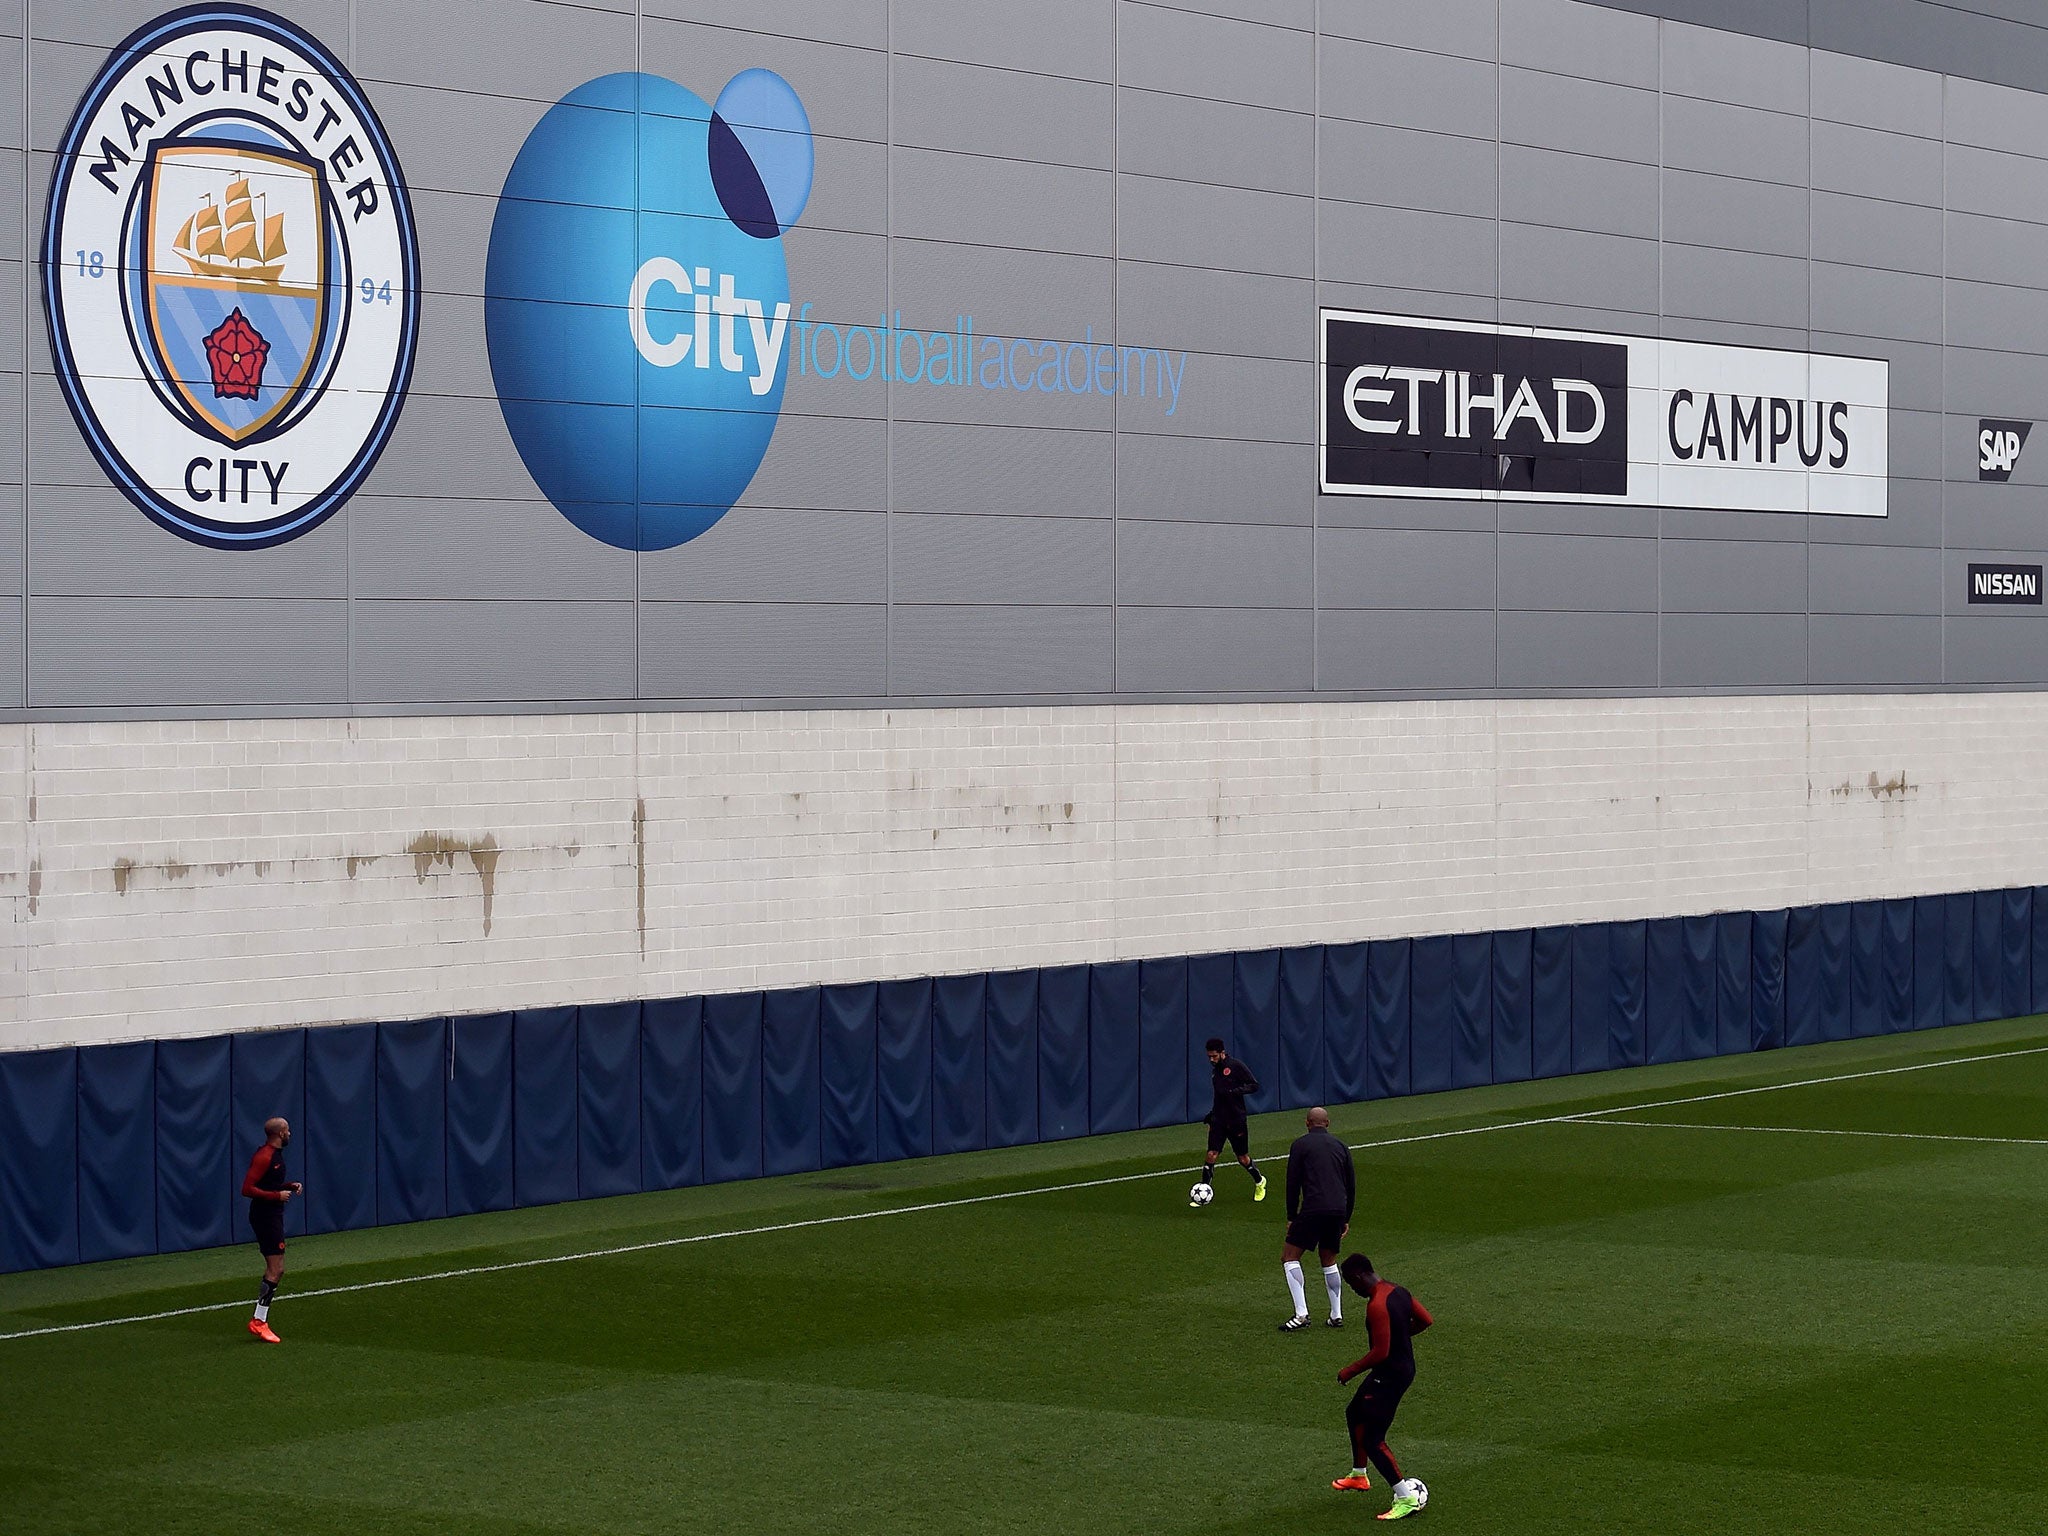 Manchester City are being investigated by the FA over the signing of three young players to their academy